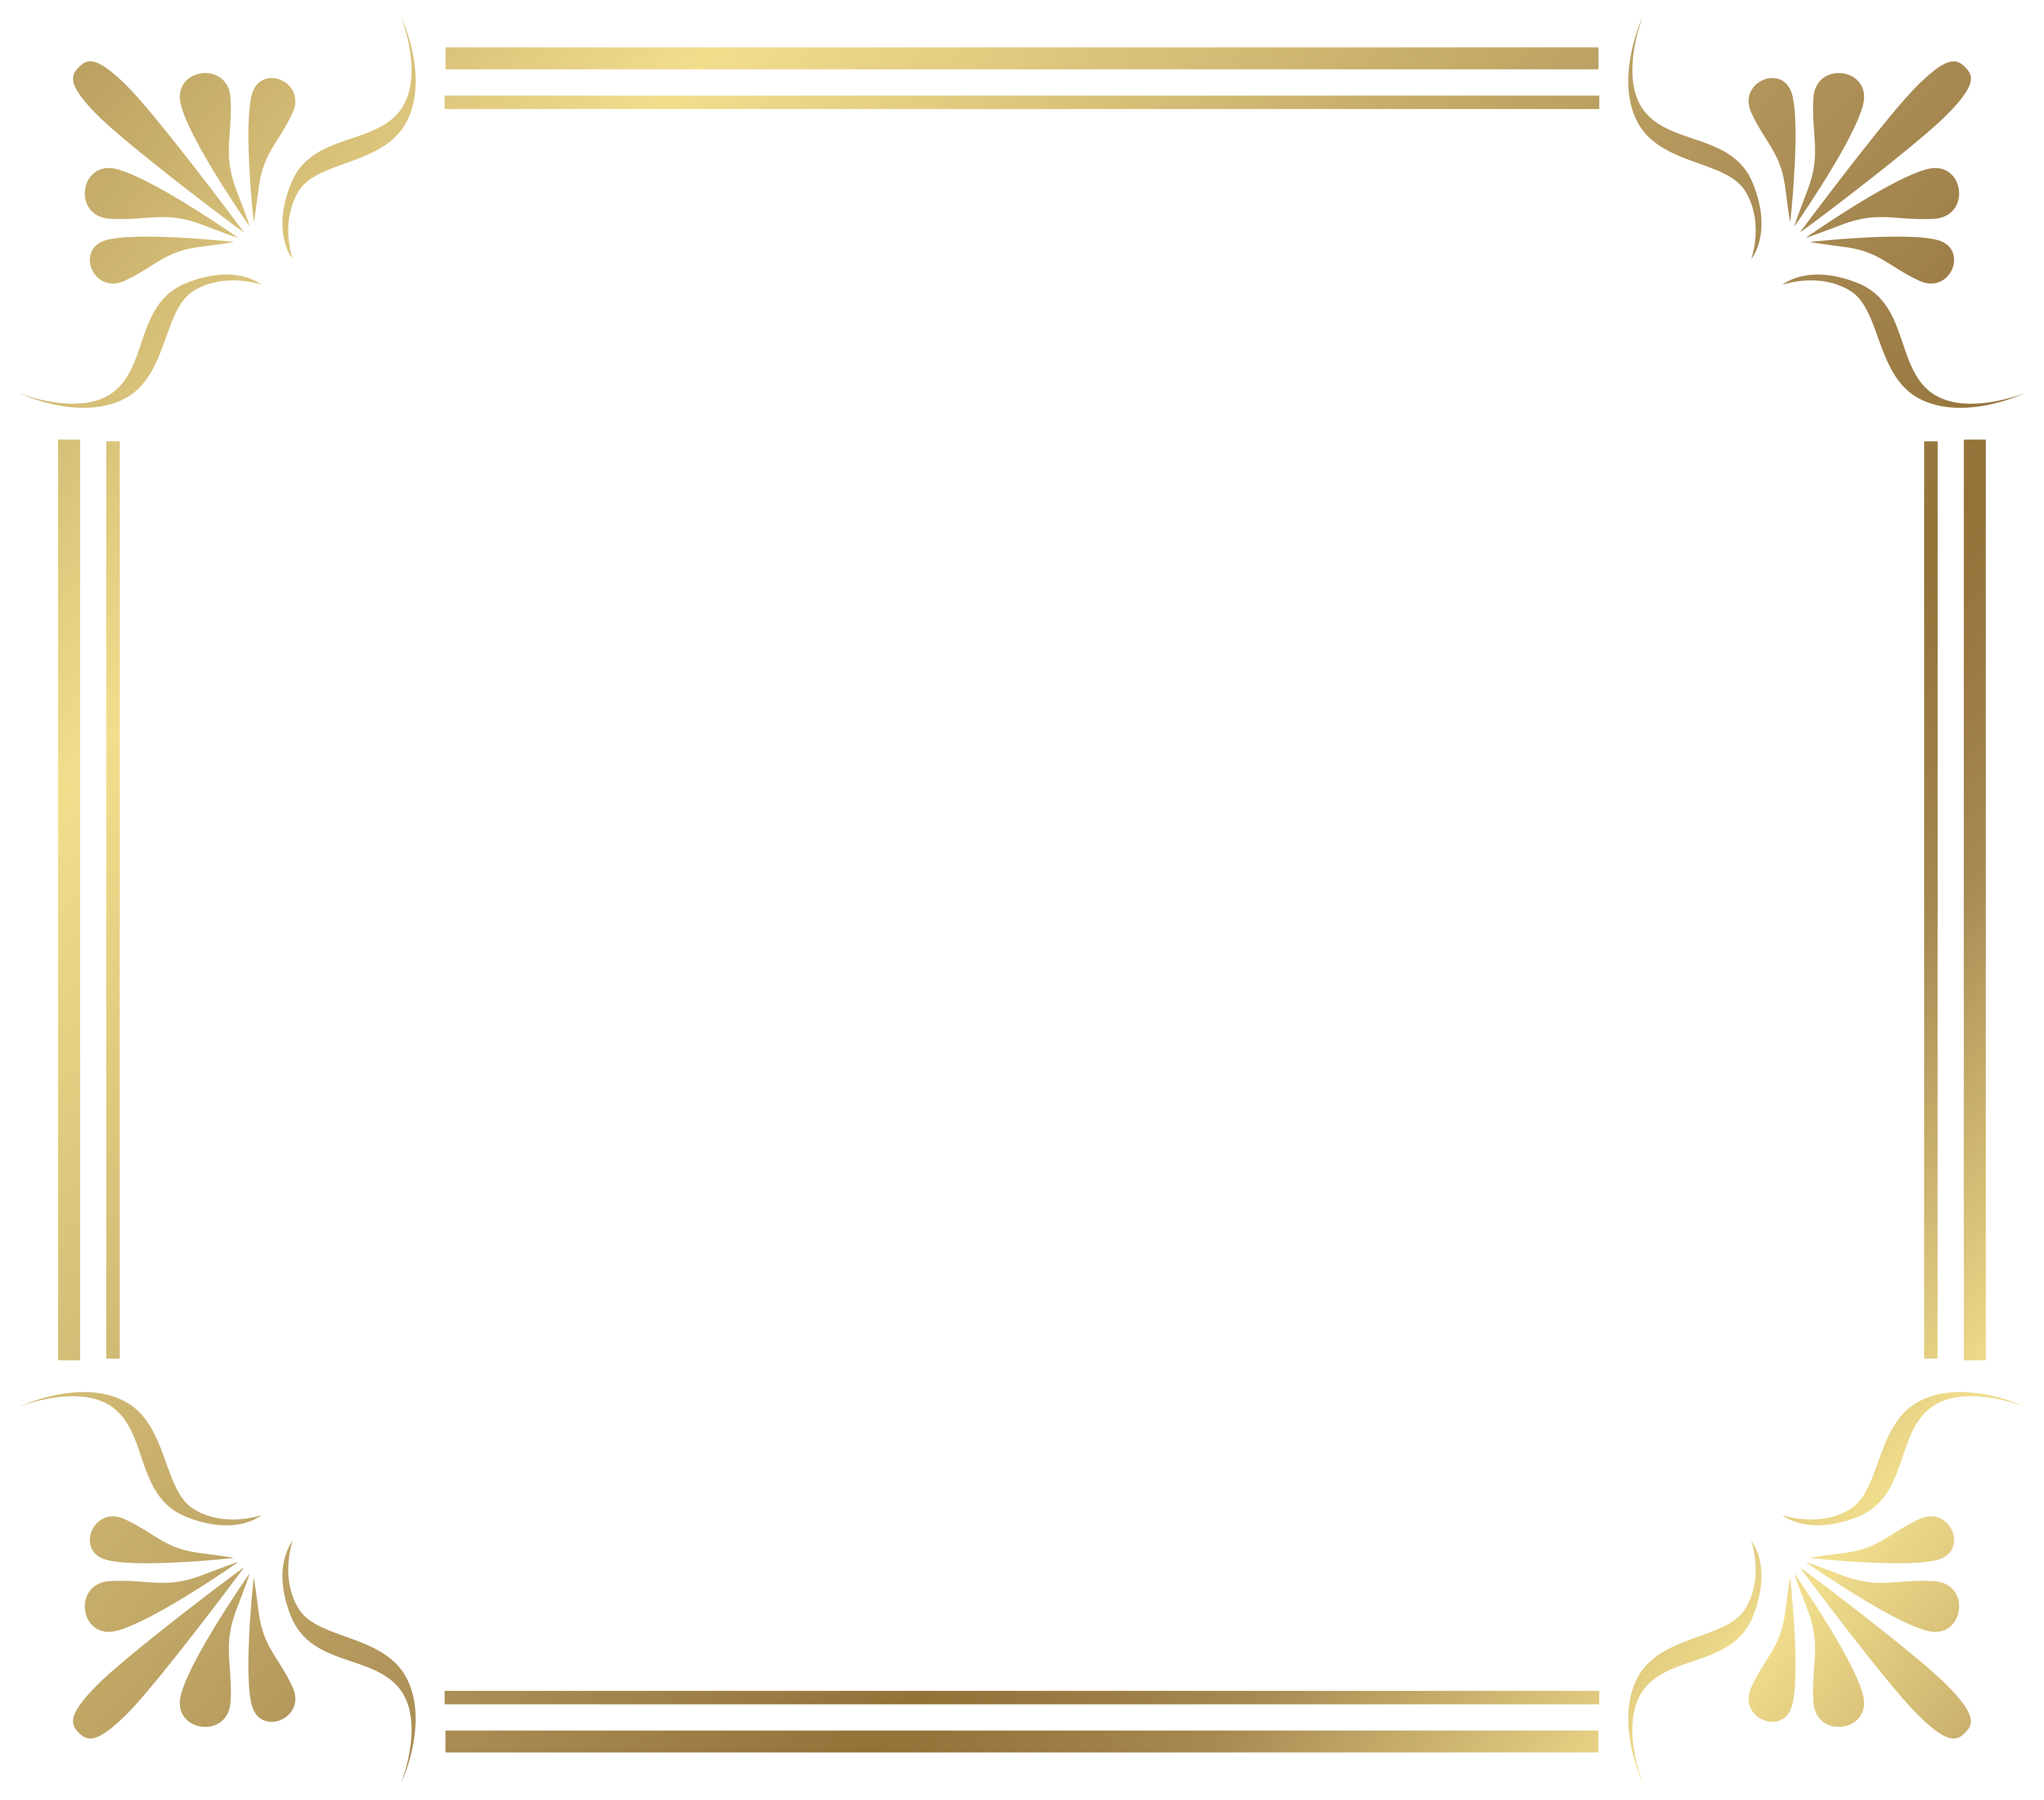 Frame Border PNG Image Quality Image And Transparent PNG Free Clipart